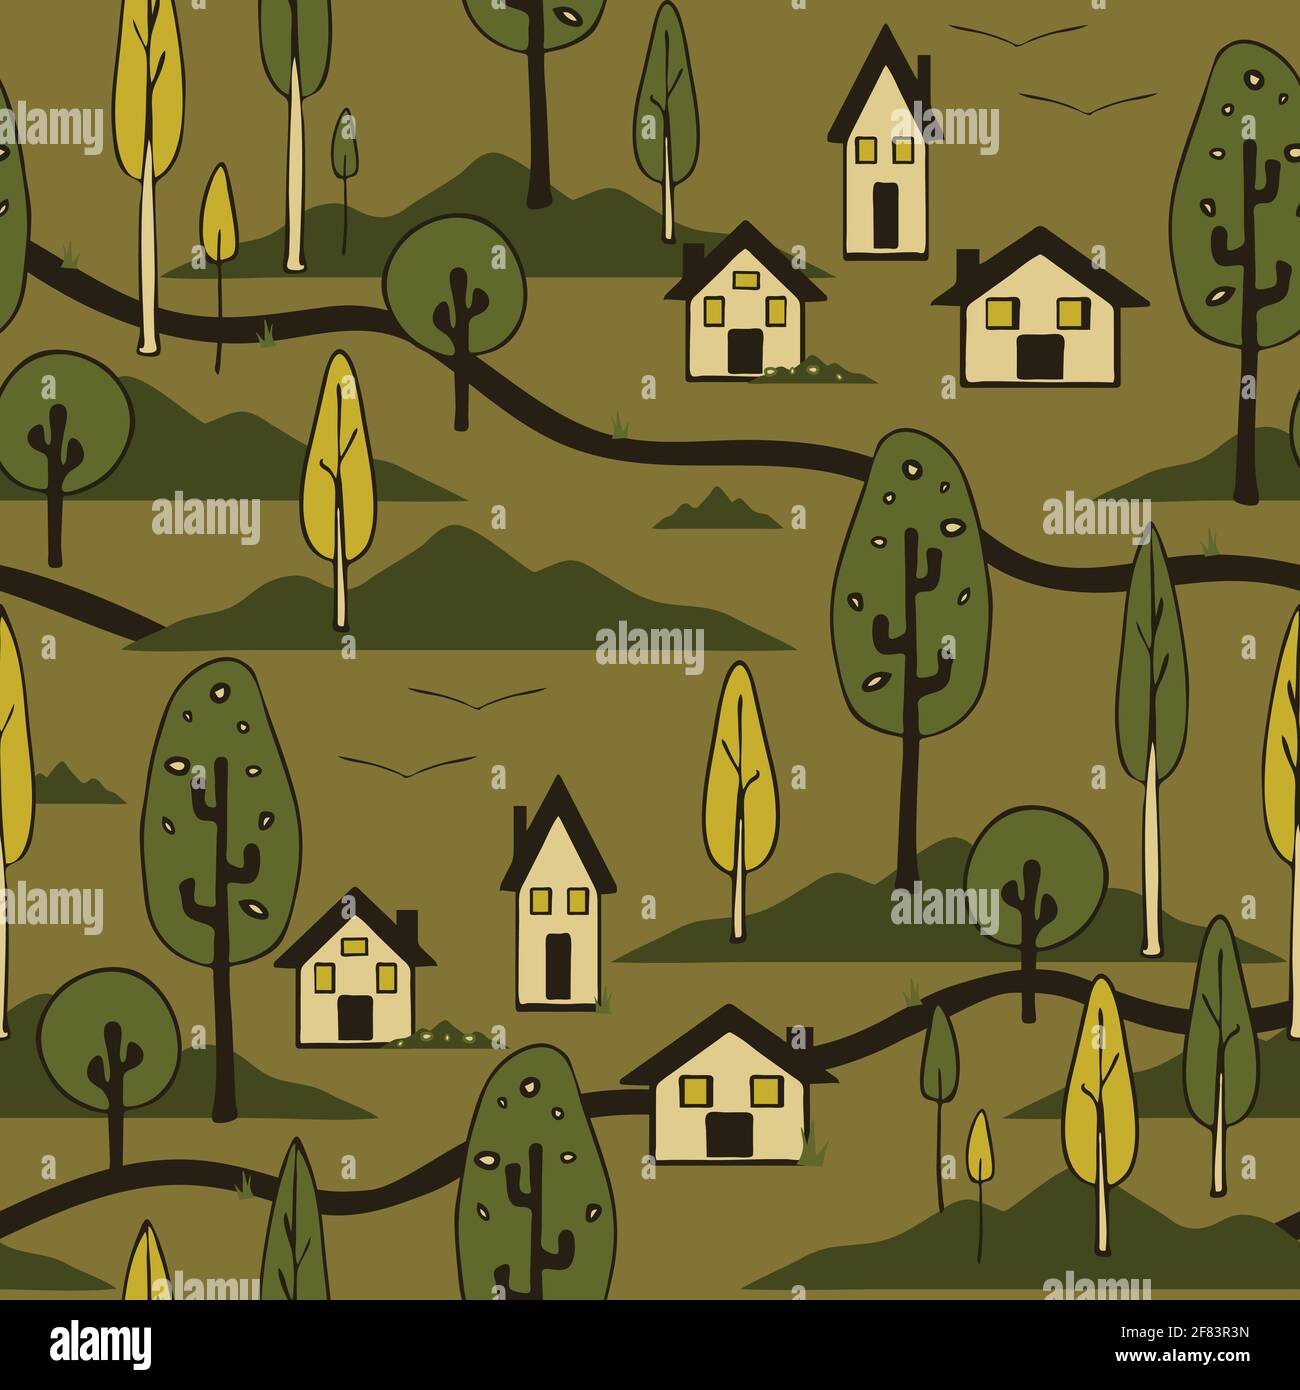 Seamless vector pattern with country home landscape on brown background. Happy home wallpaper design. Decorative rural forest fashion textile. Stock Vector